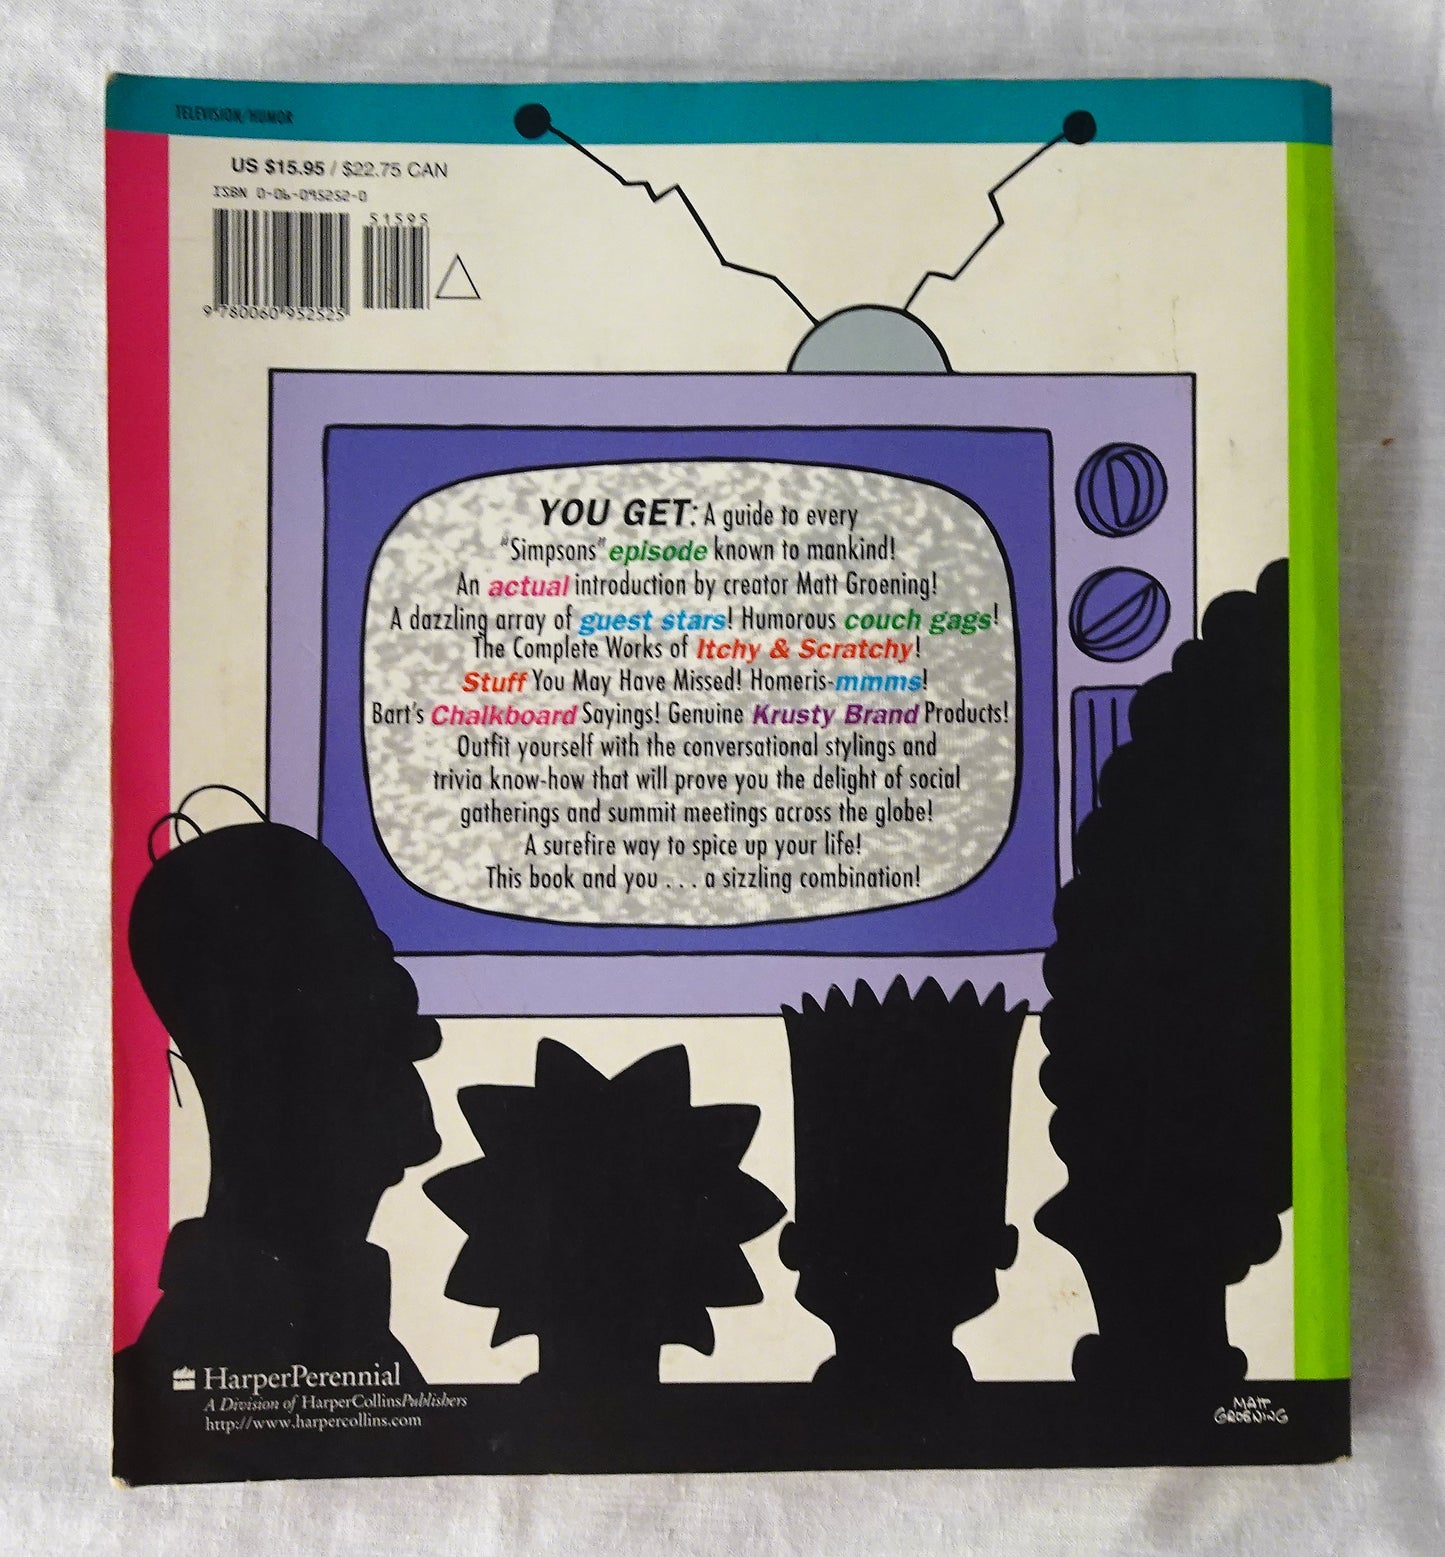 The Simpsons Edited by Ray Richmond and Antonia Coffman